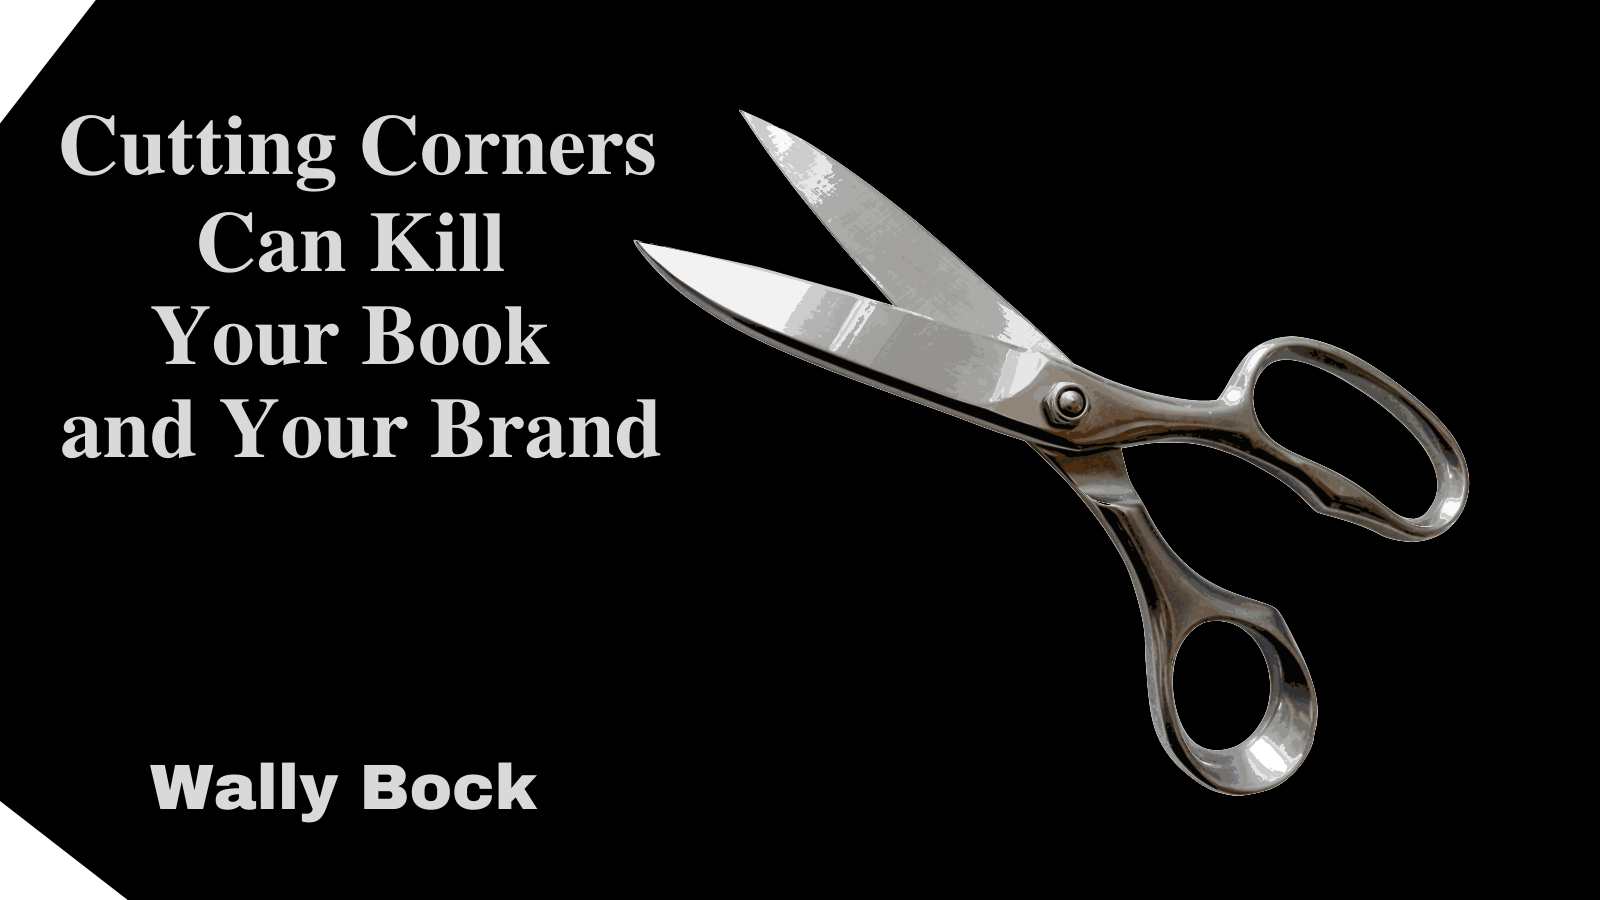 Cutting Corners can Kill Your Book and Your Brand